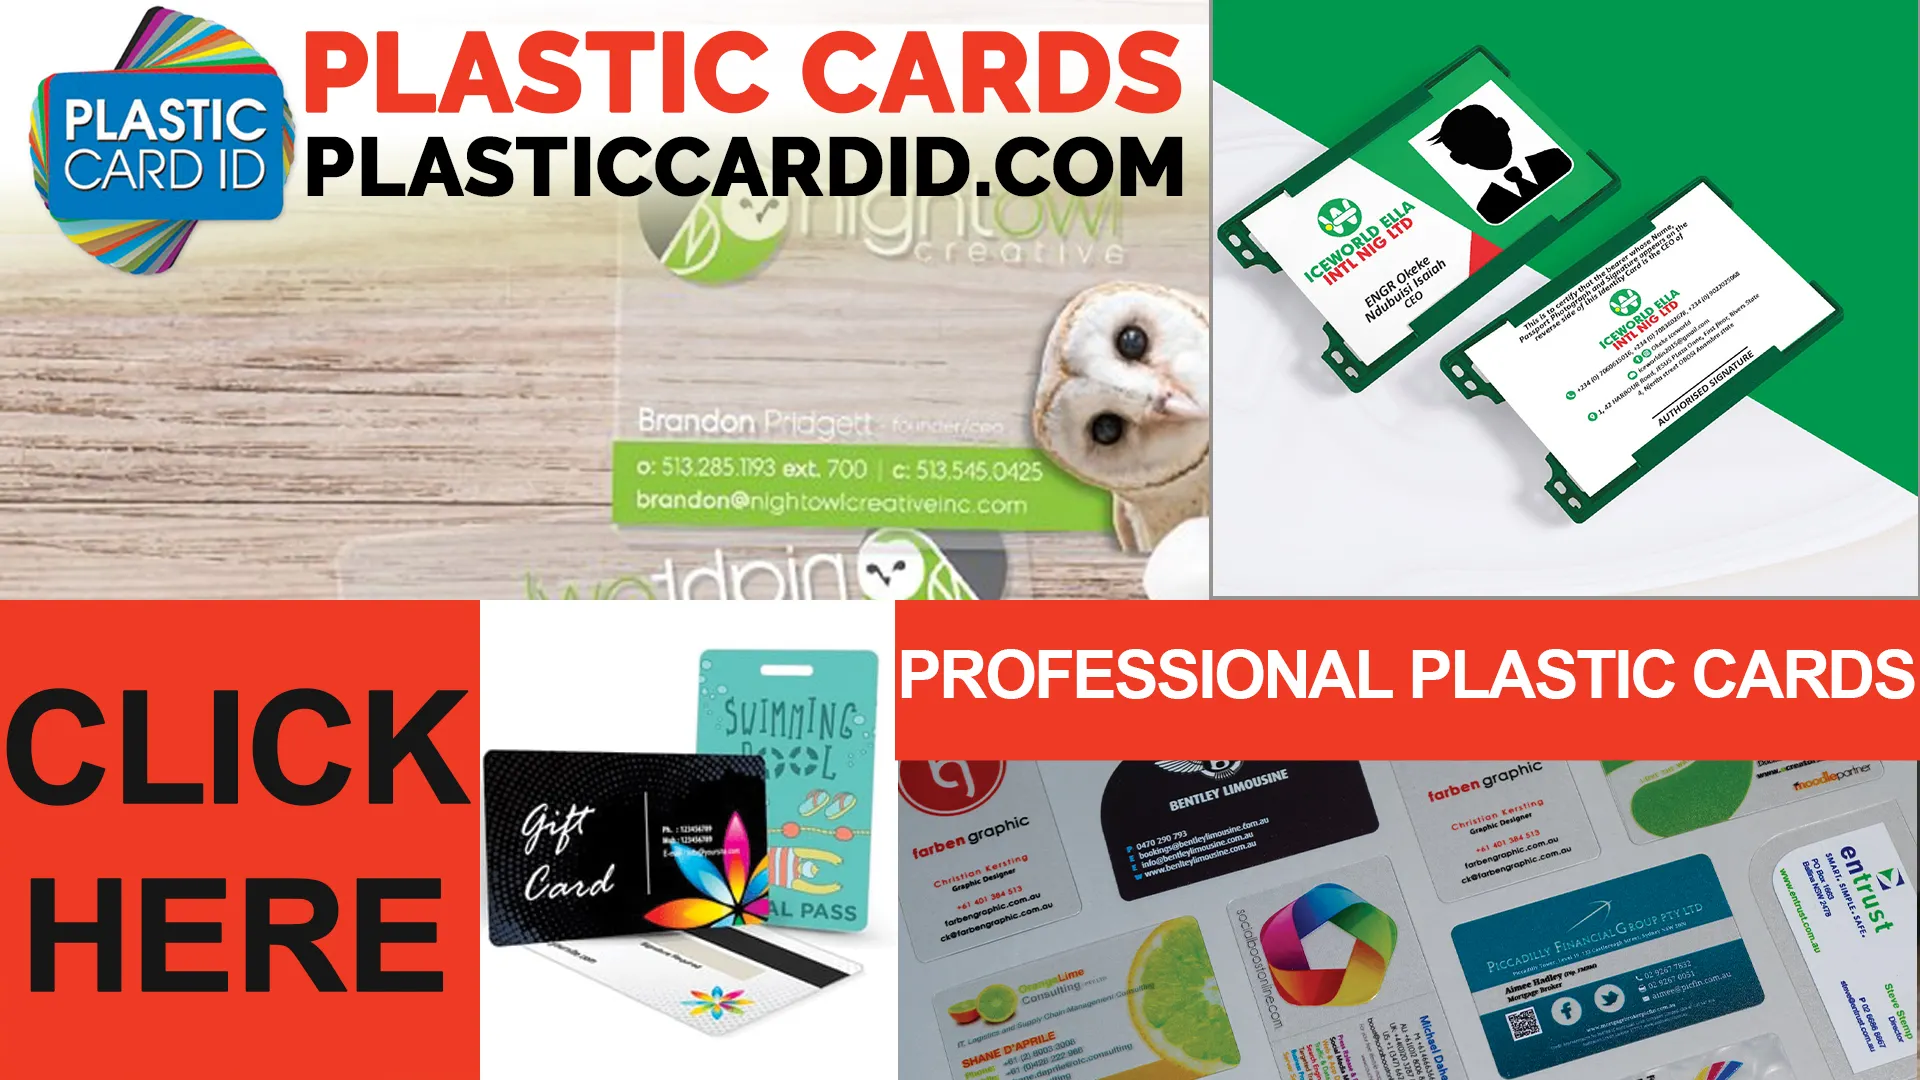 Welcome to Plastic Card ID




: Your Partner in Sustainable Card Manufacturing